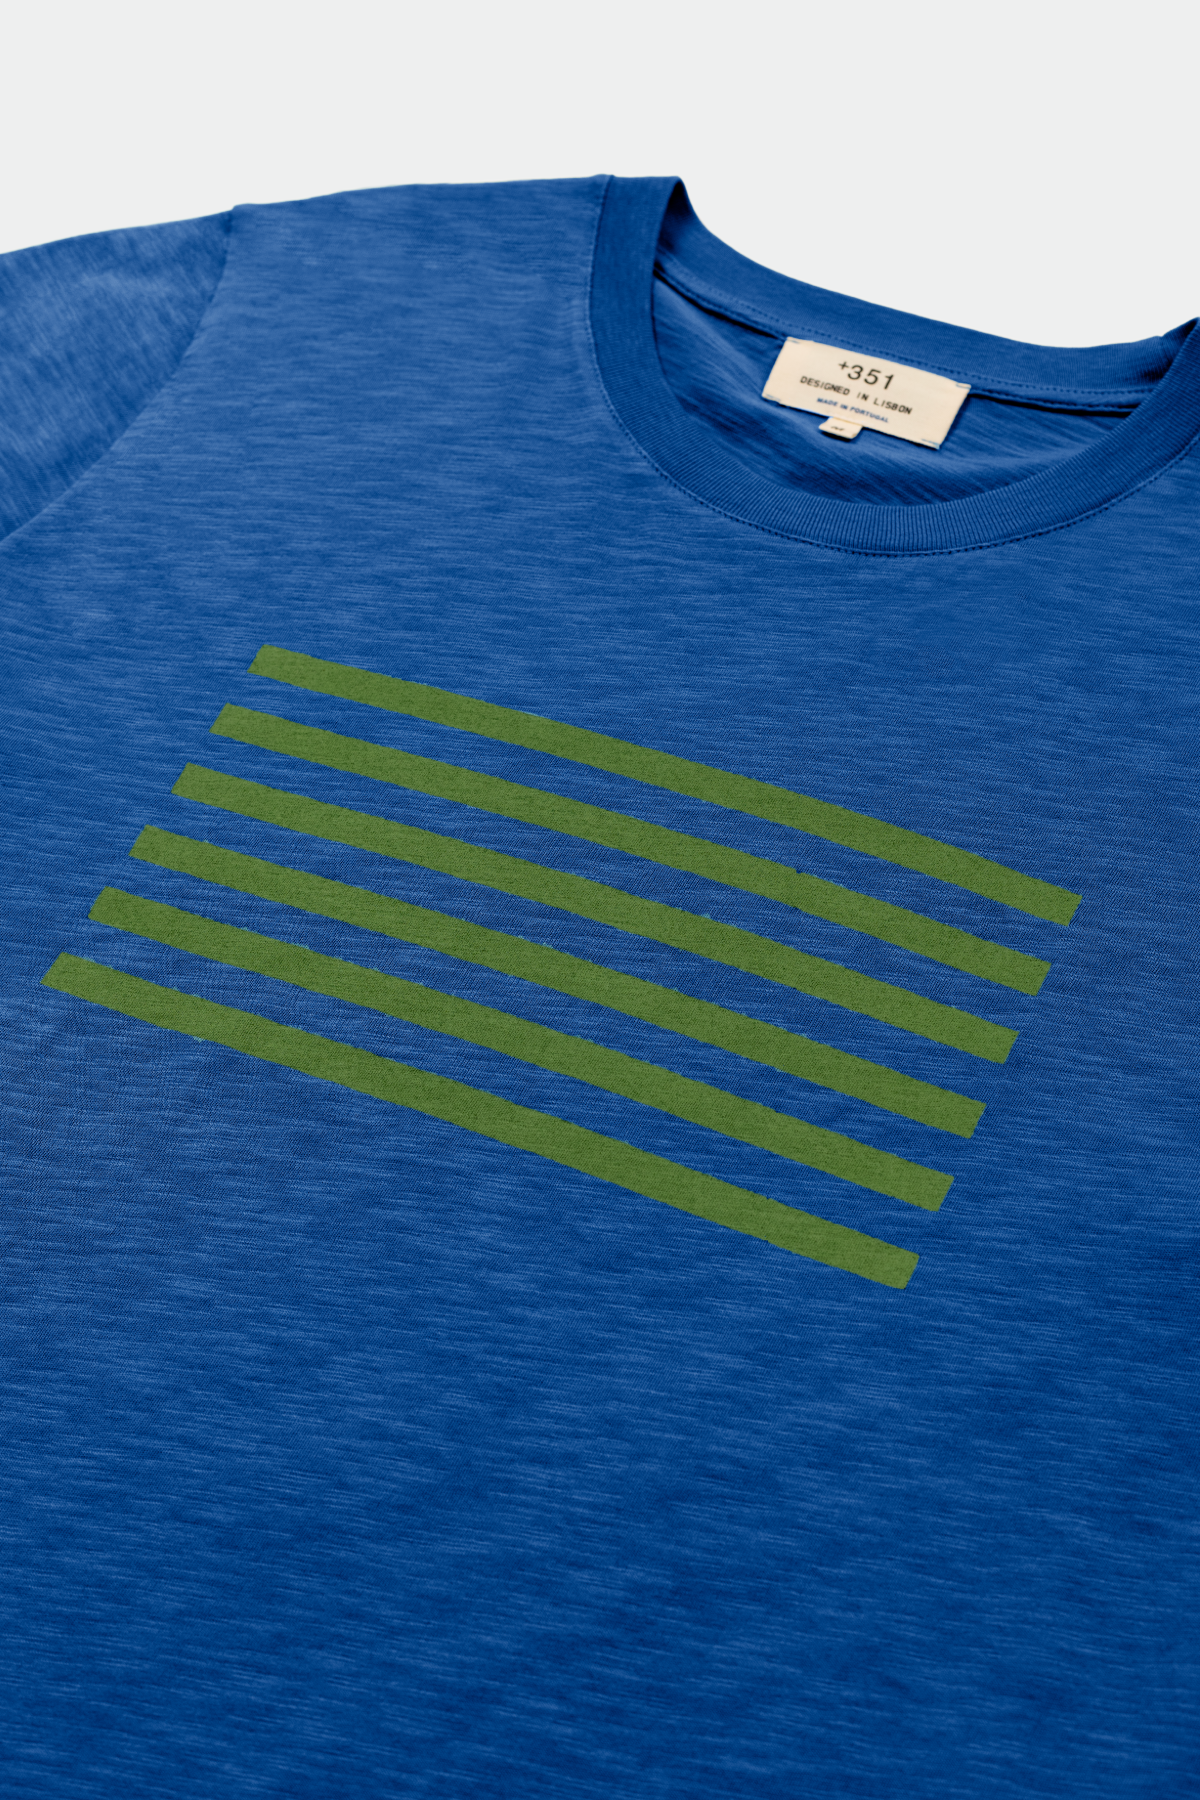 T-SHIRT GRAPHIC FREQUENCY STEEL BLUE & TURTLE GREEN